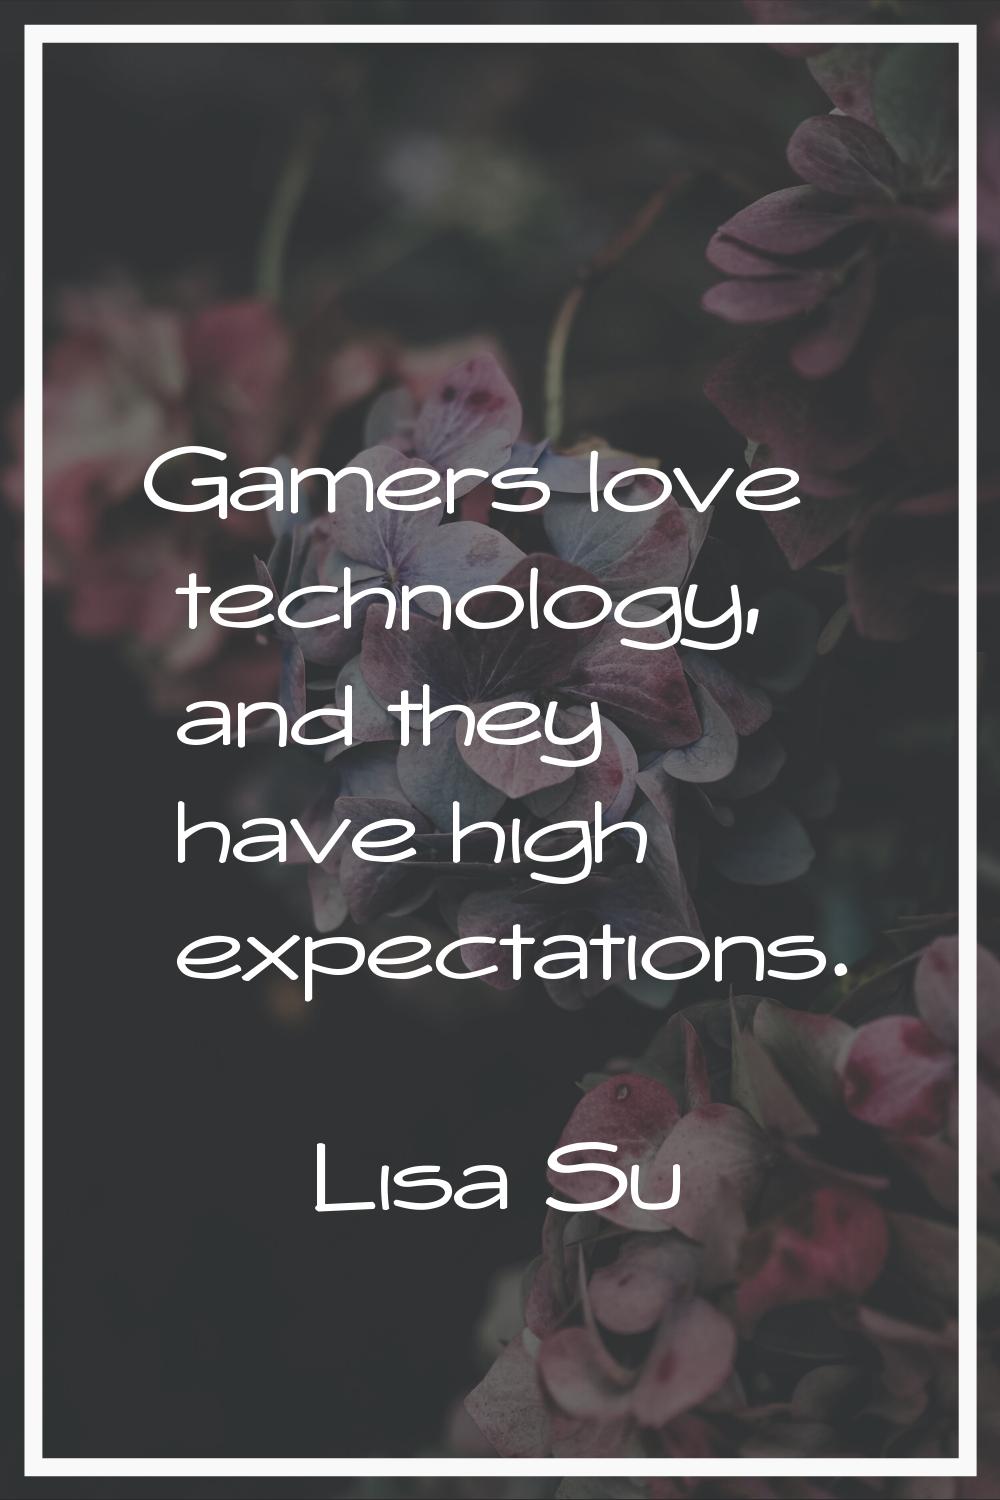 Gamers love technology, and they have high expectations.